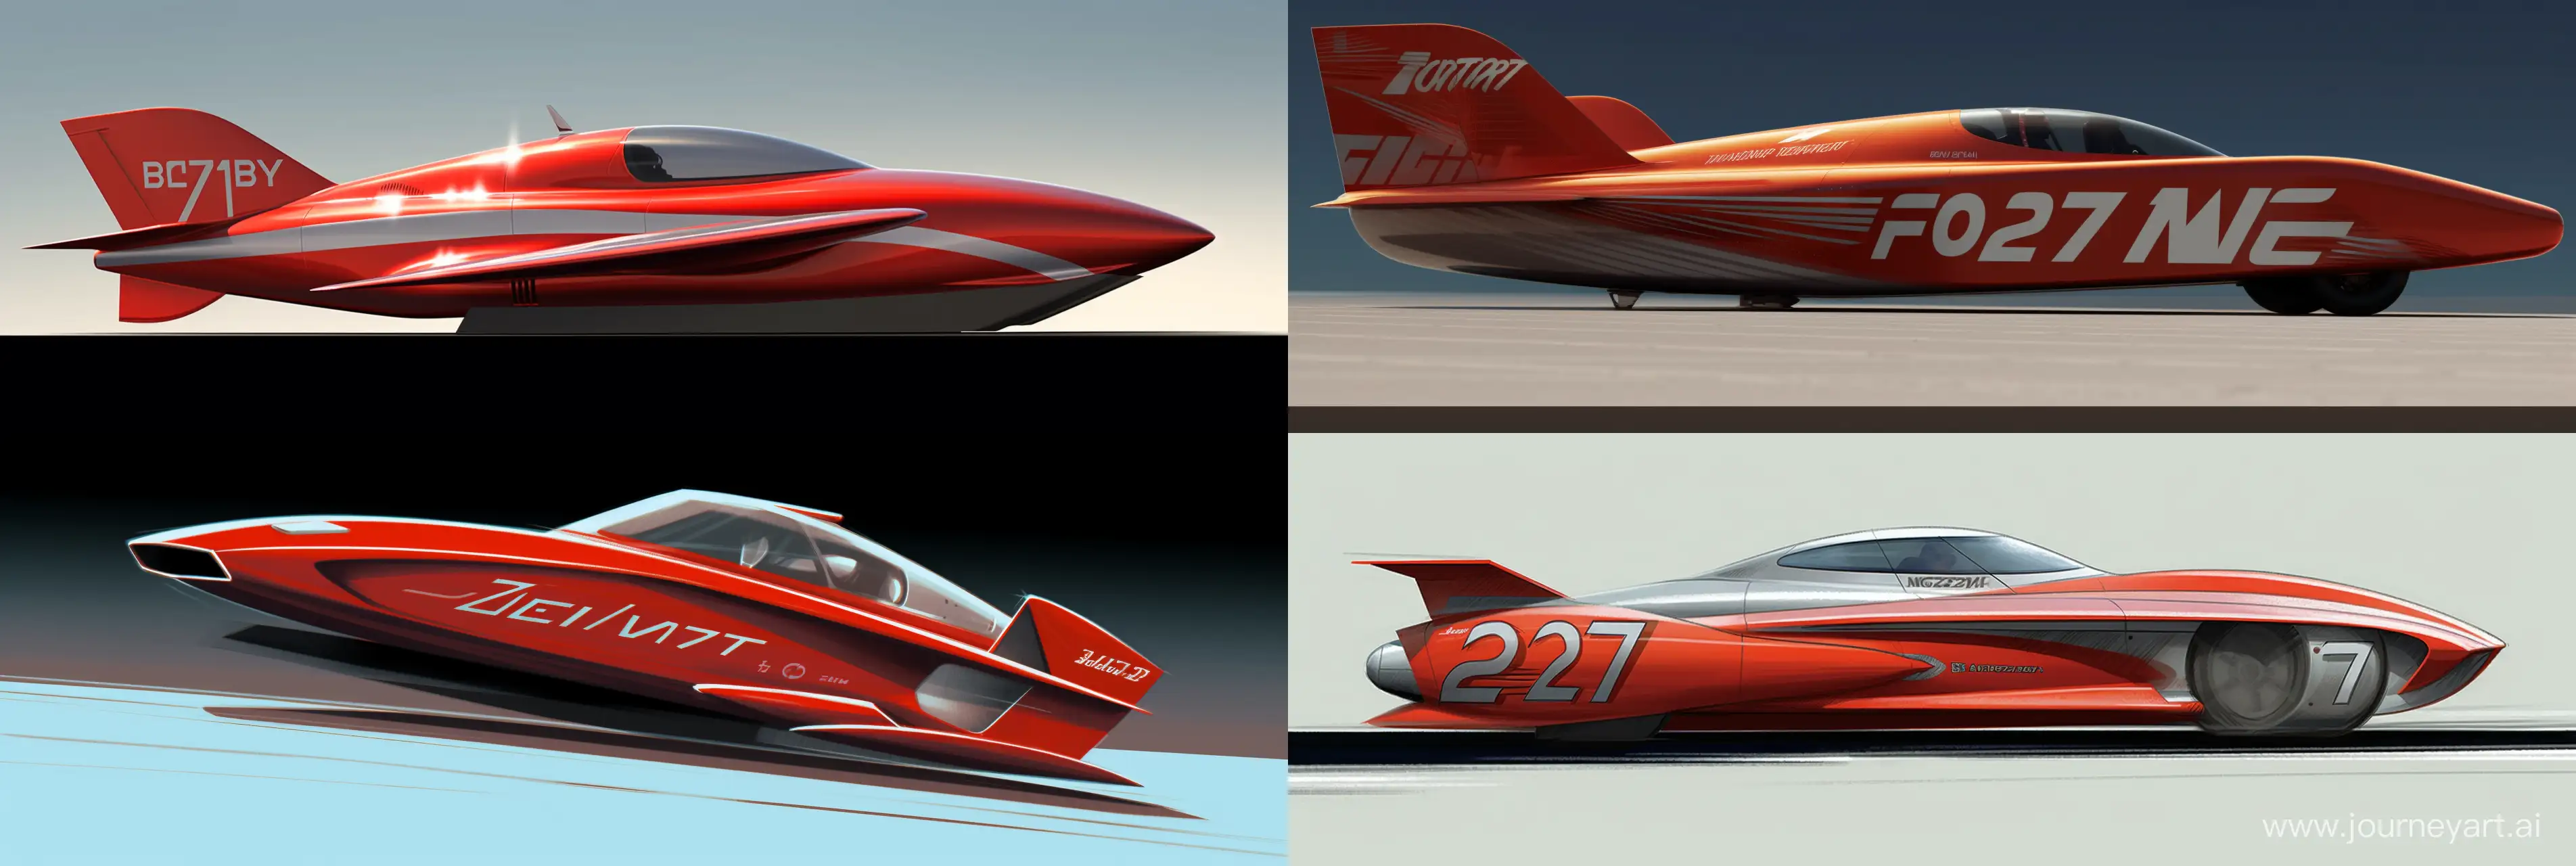 A dynamic sketch of a Formula 2 powerboat livery design, emphasizing speed and fluidity, incorporating shades of crimson and silver. The design should feature sleek, aerodynamic lines that suggest motion even when stationary, with subtle geometric patterns to add sophistication. The boat's hull number '71' should be prominently displayed in a bold, modern font, accented with a stylized wave motif to highlight its aquatic prowess. Artistic influences of Futurism to capture the essence of speed and technology, with a nod to the minimalist style of Bauhaus for clean, effective design communication. Render the sketch in a loose, conceptual pencil on paper style with hints of watercolor to give a vibrant yet professional look. Desired aspect ratio is 3:1 to capture the full side view of the boat --ar 3:1 --stylize 300 --v 5